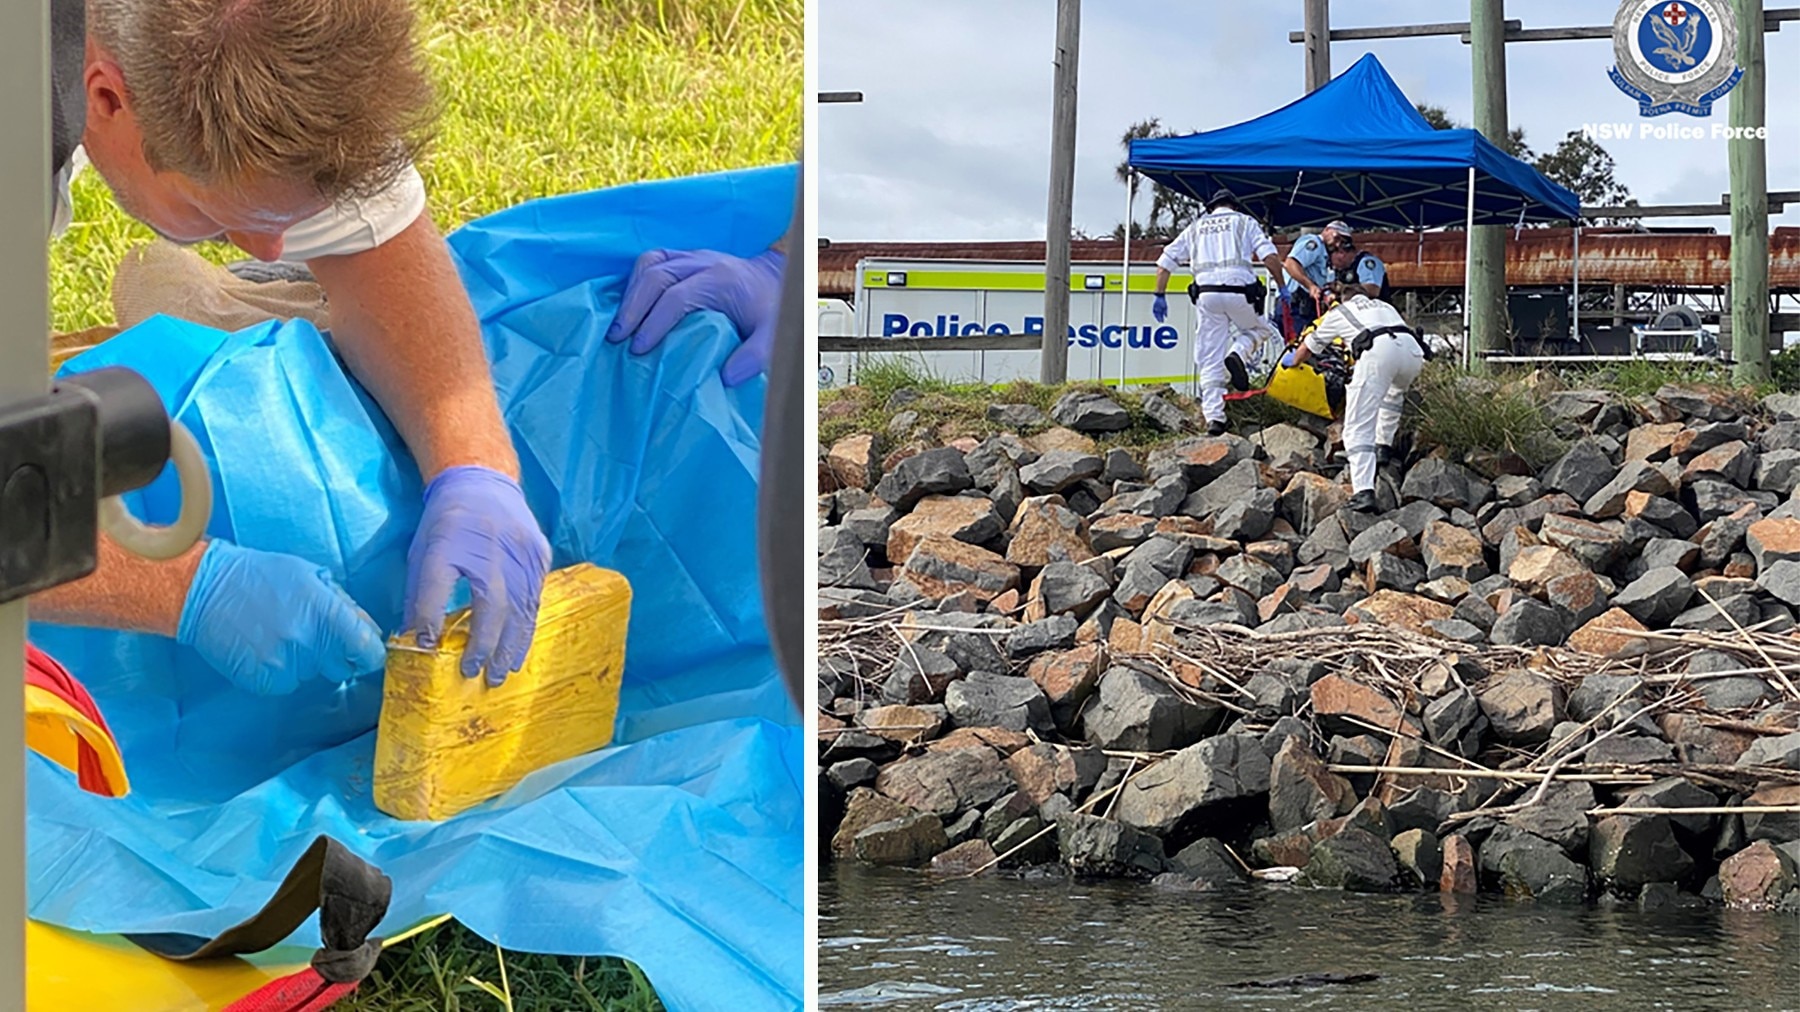 NSW Organised Crime Squad detectives are investigating after a diver died after being found unconscious near 50kg of cocaine on the shore at Newcastle. 